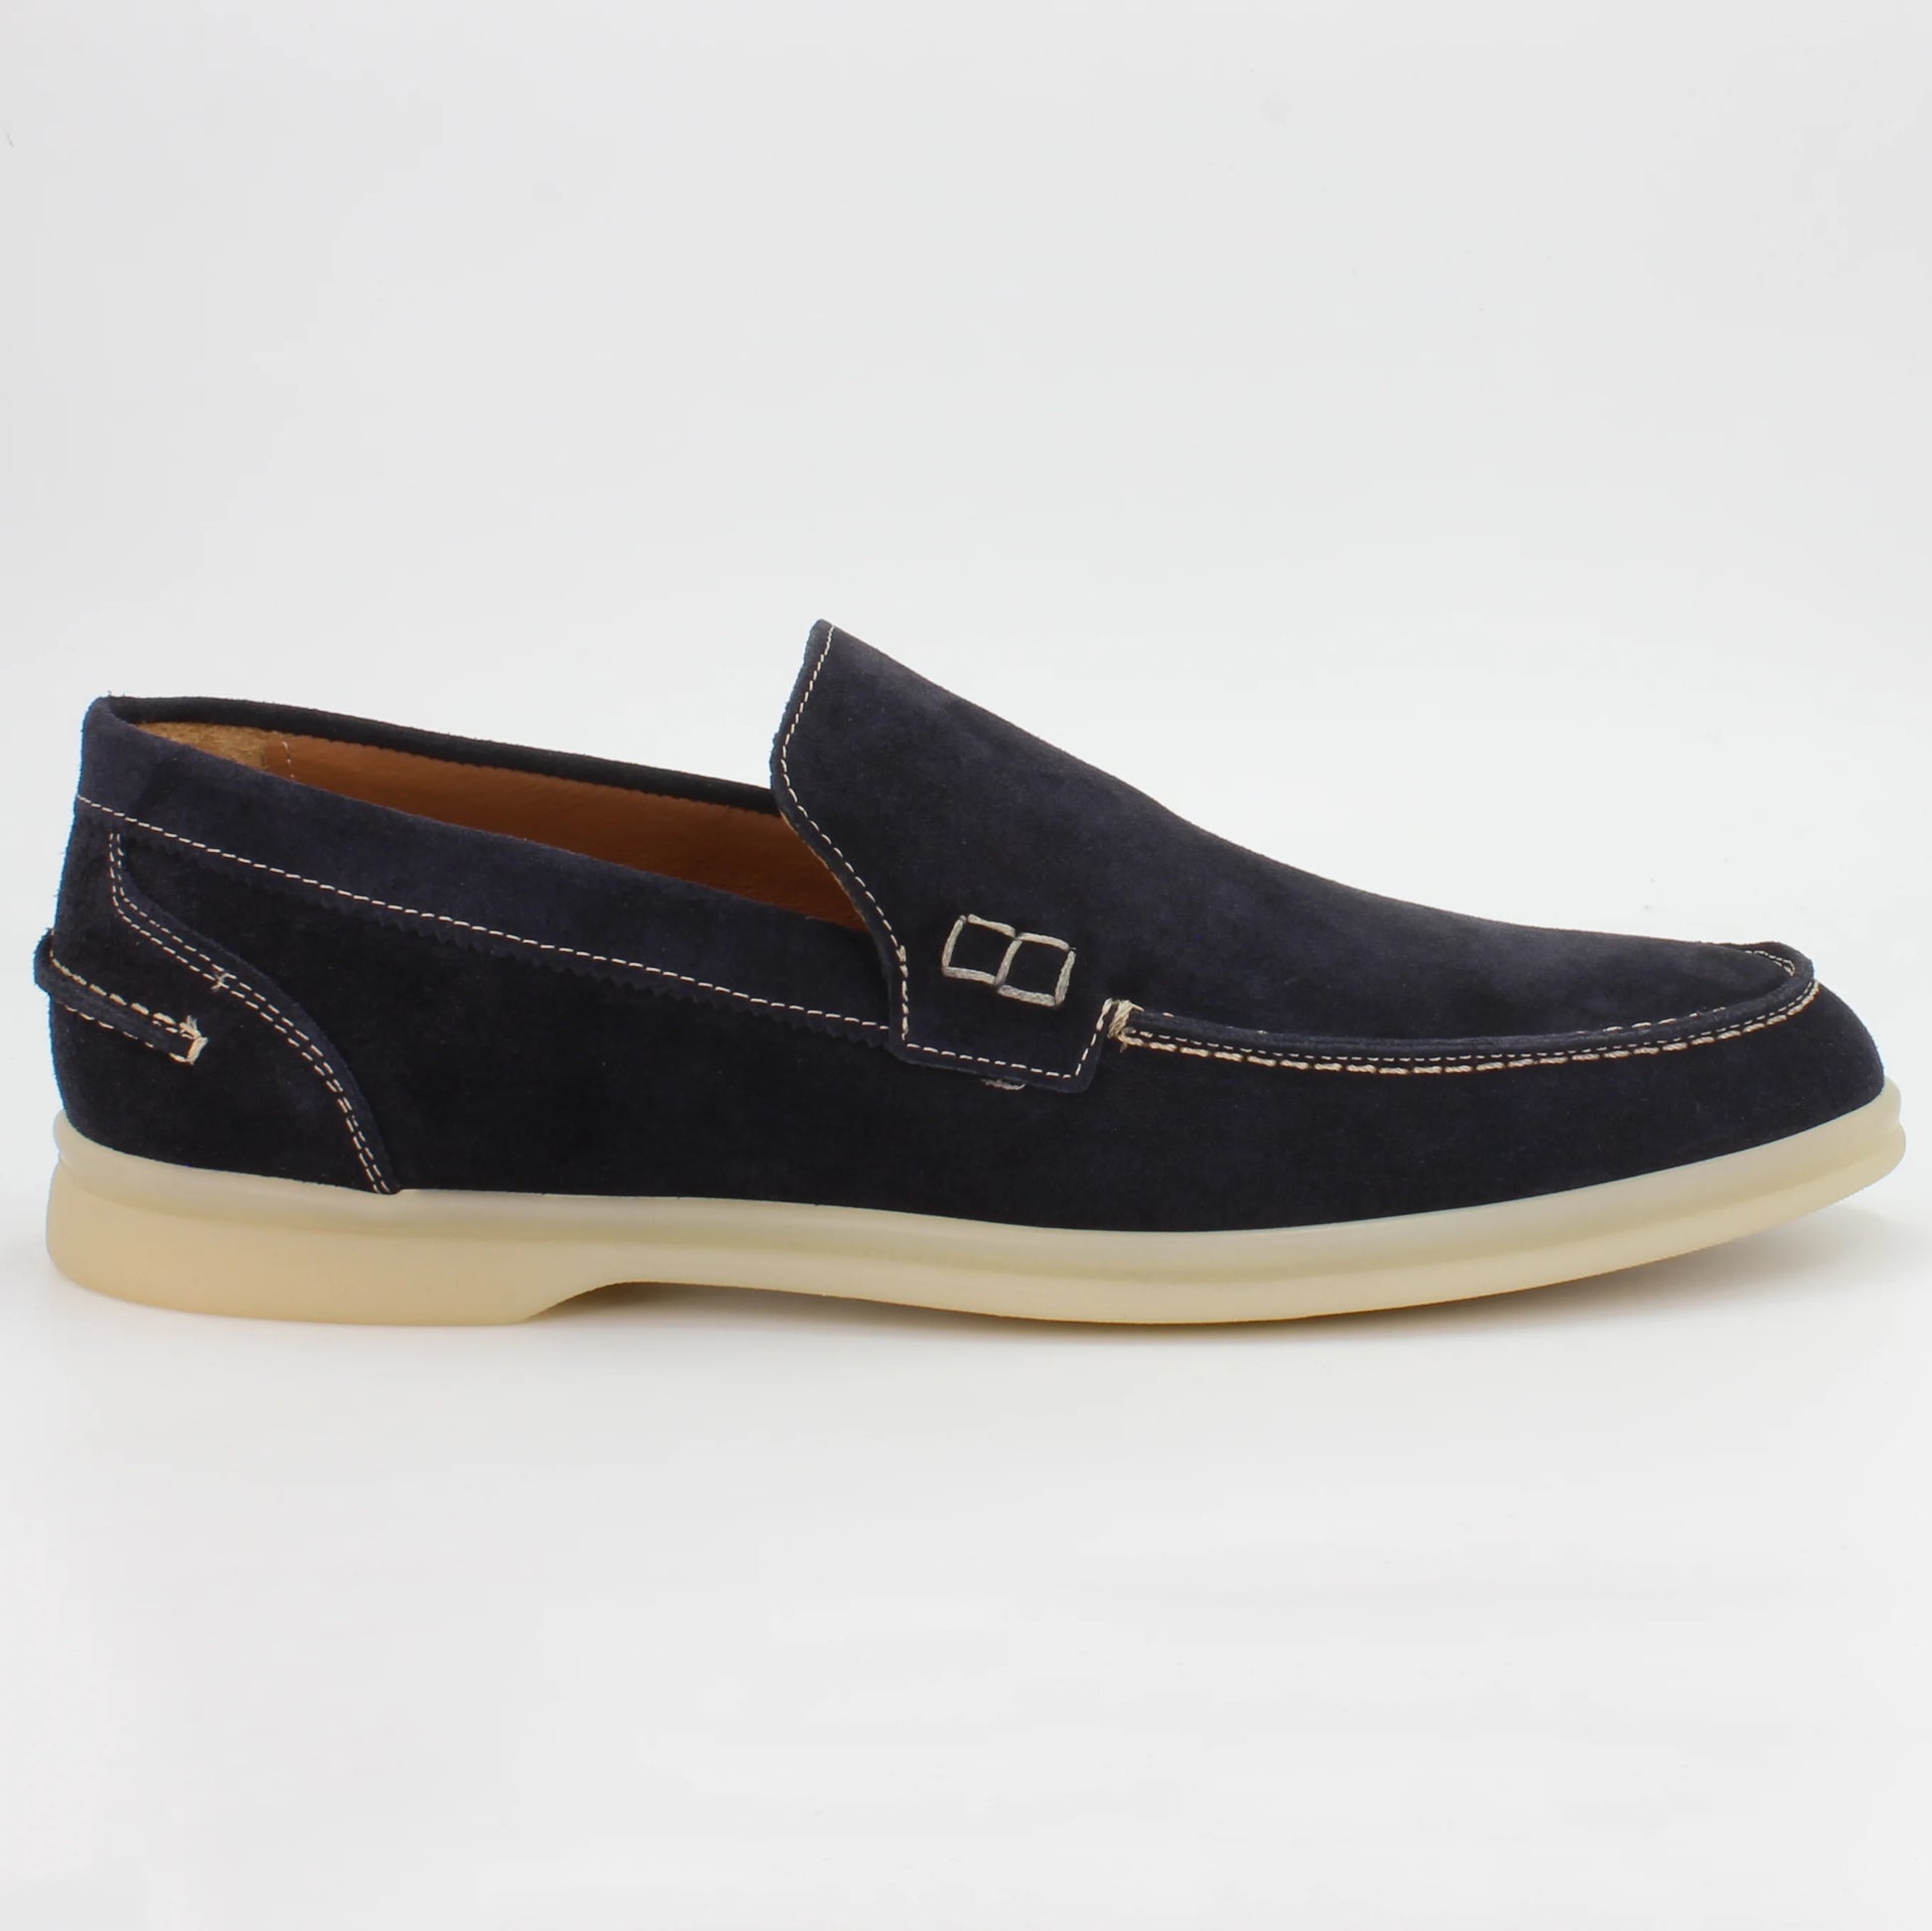 Shop Handmade Italian Leather suede moccasin in navy (BER2) or browse our range of hand-made Italian shoes for men in leather or suede in-store at Aliverti Cape Town, or shop online. We deliver in South Africa & offer multiple payment plans as well as accept multiple safe & secure payment methods.